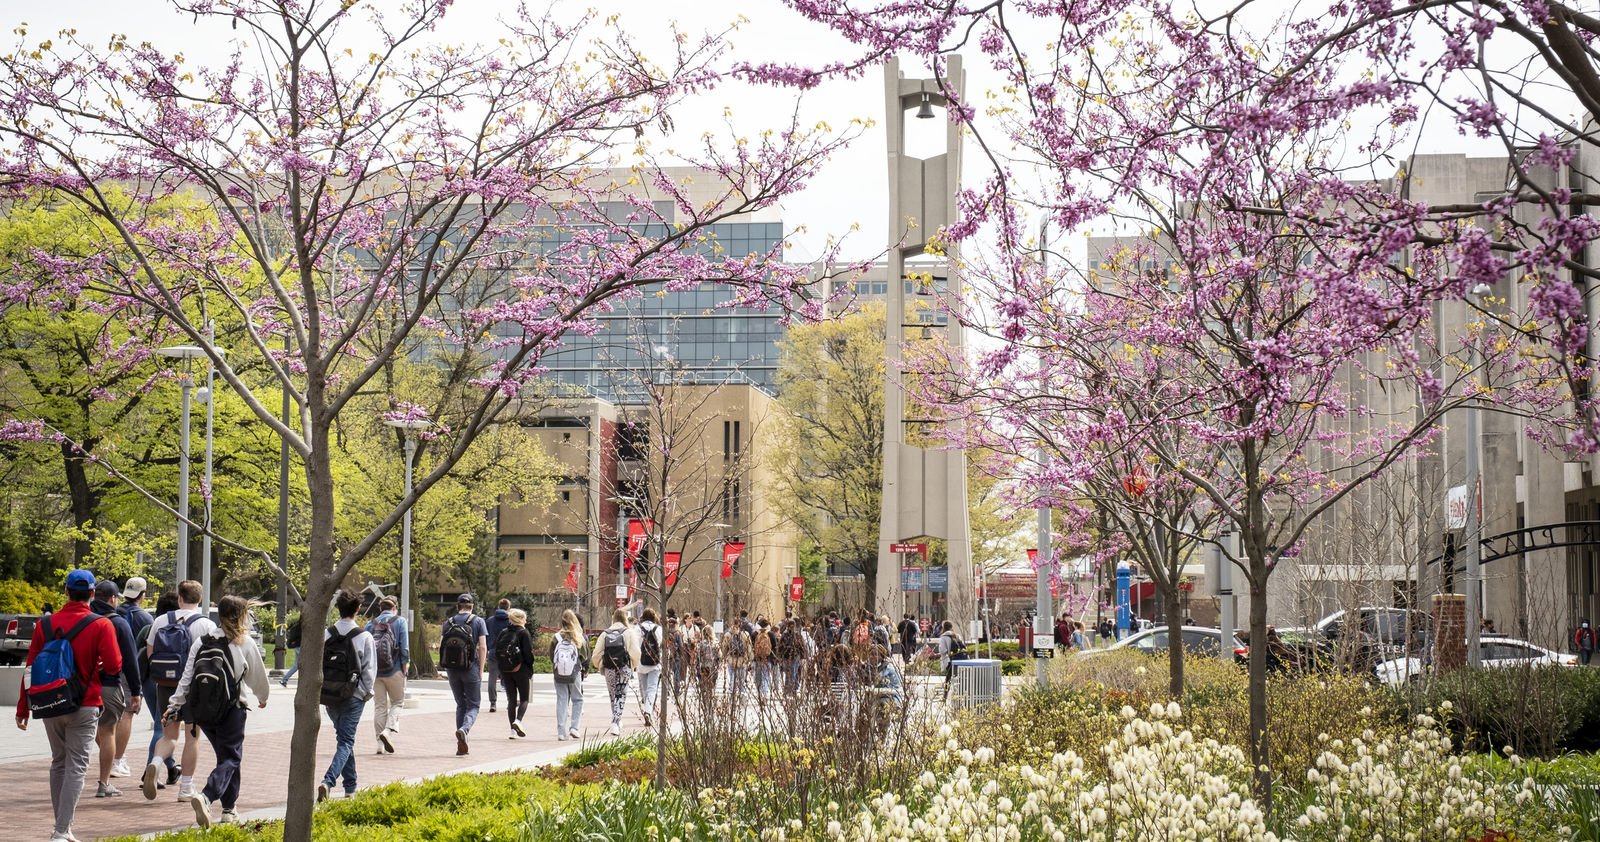 Temple campus with spring blossoms